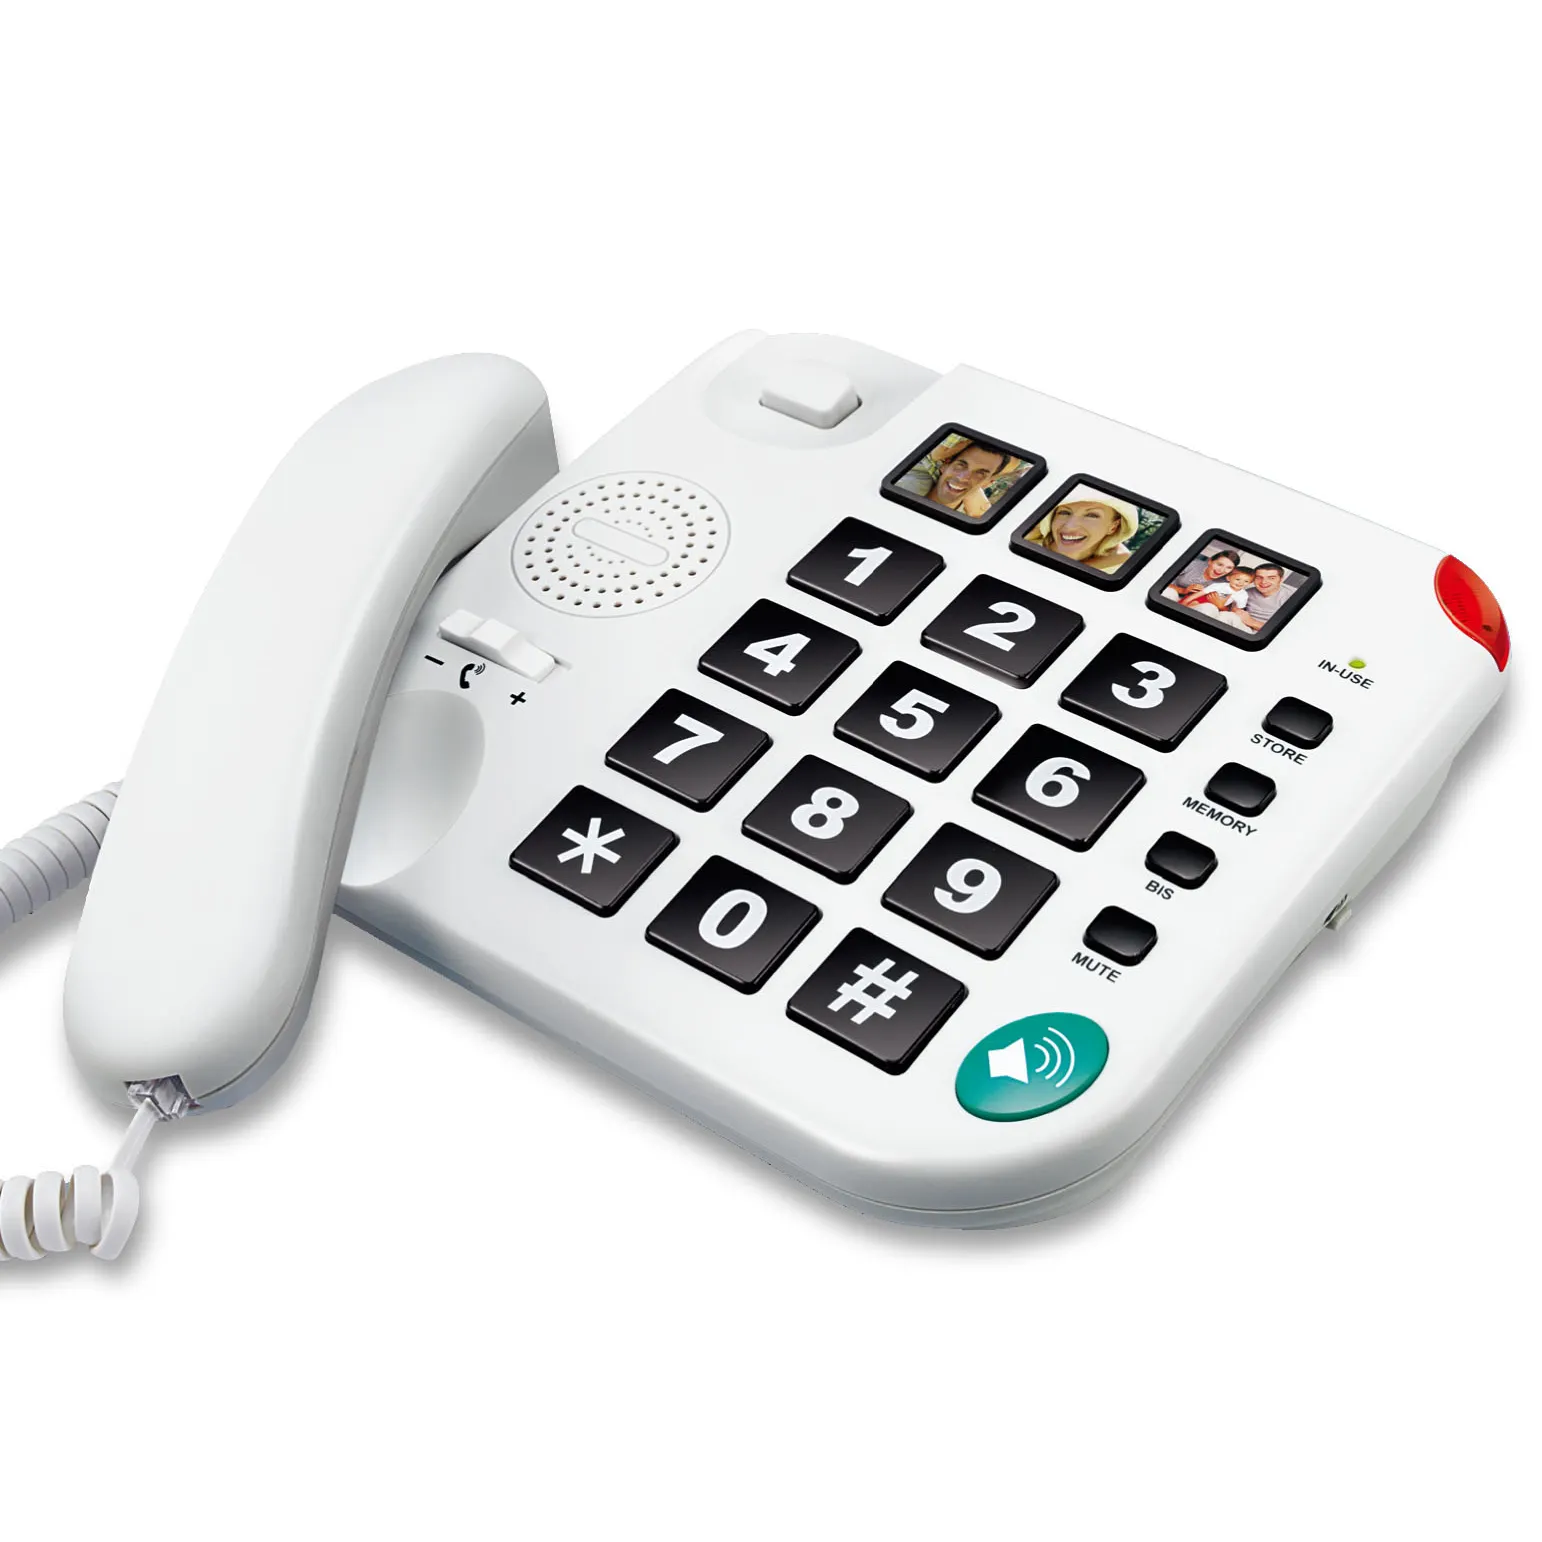 CB420-1 2021 best selling big button phone fancy corded house telephone set with emergency and braille for Seniors People